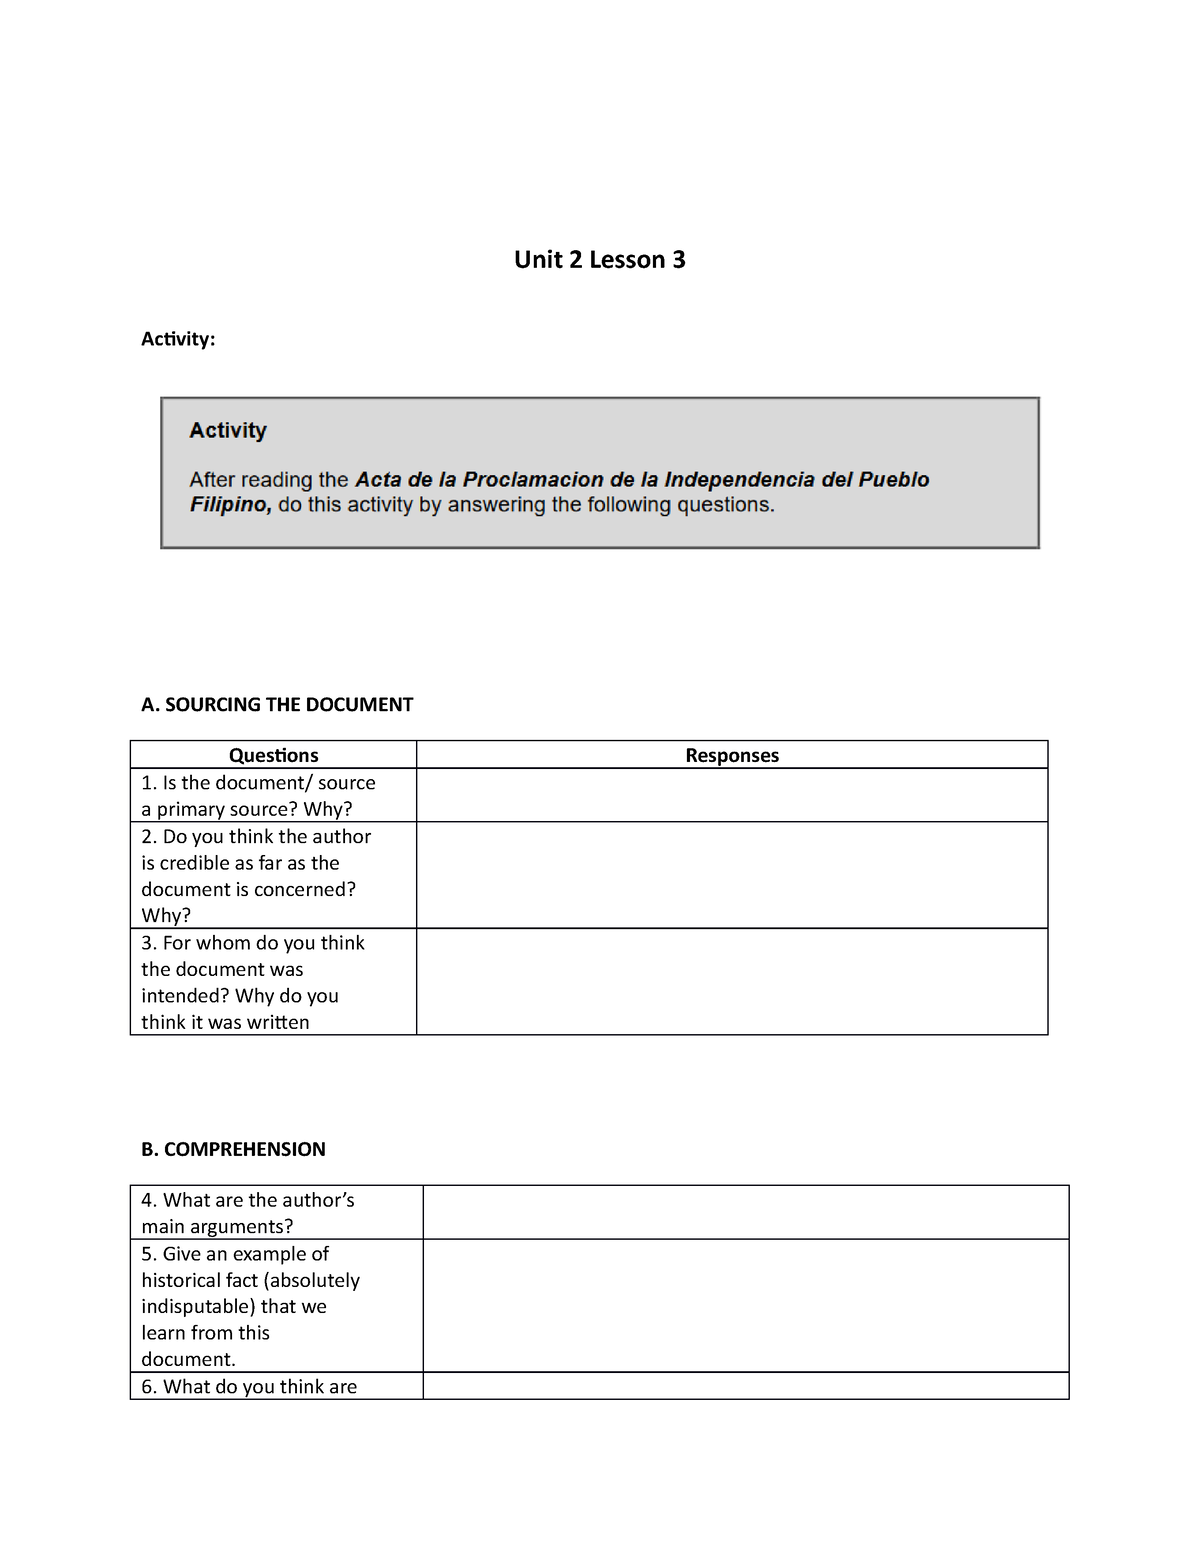 Unit 2 Lesson 3 Activity In Riph Geed 10033 Unit 2 Lesson 3 Activity A Sourcing The Document 1574